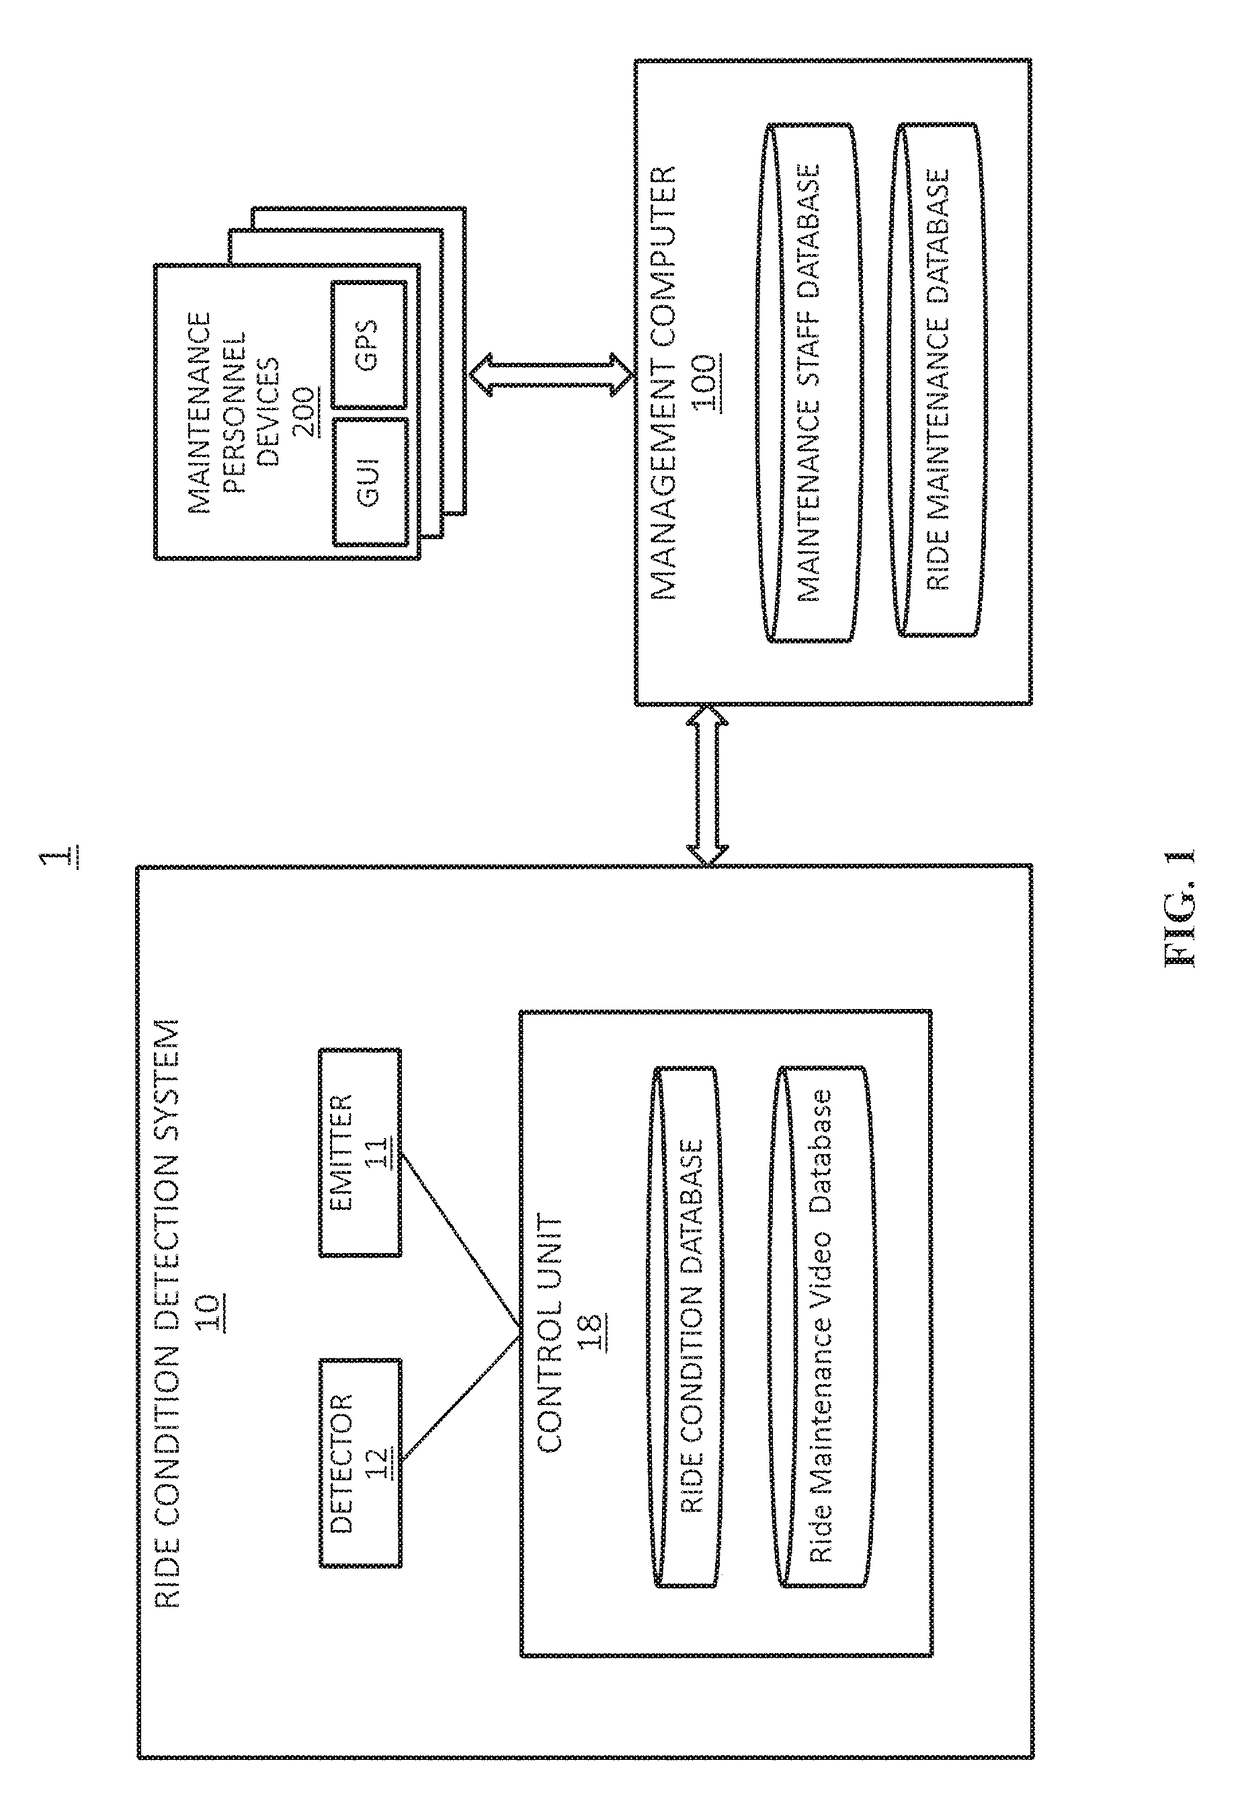 Cost effective ride maintenance tracking system and method thereof